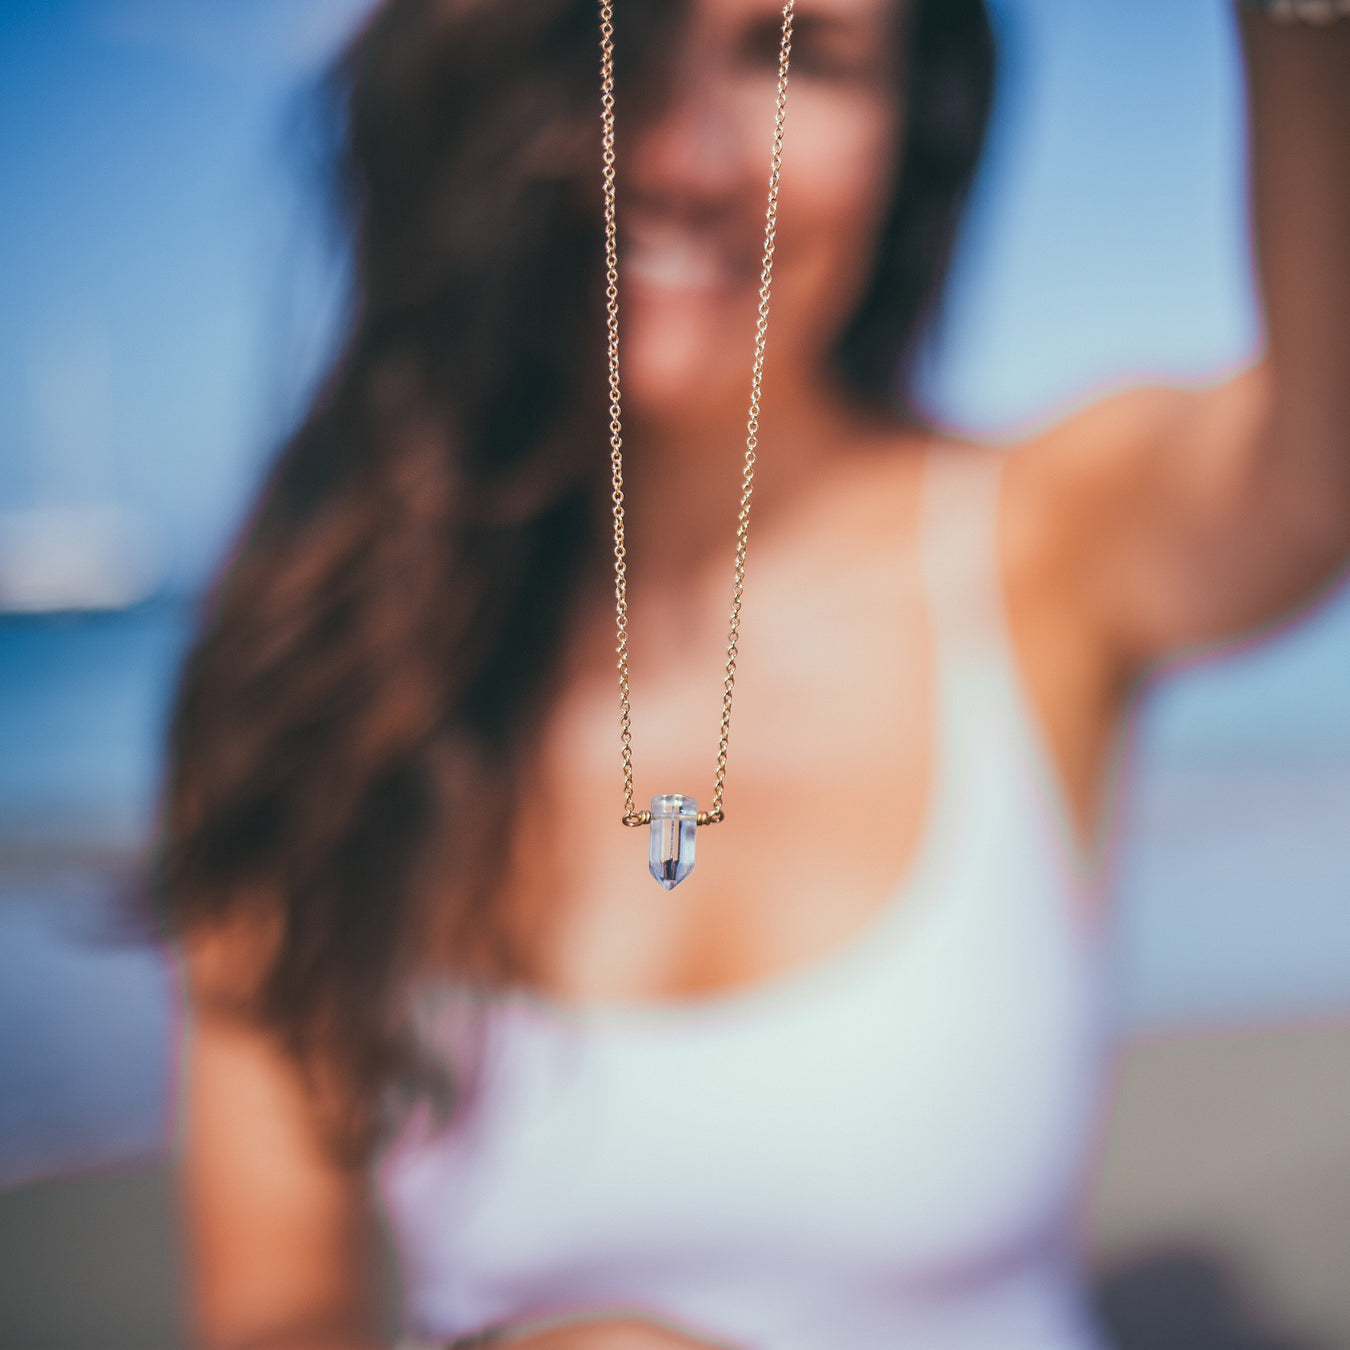 Tiny Clear Quartz Crystal crystal necklace on gold chain with model blurry in background